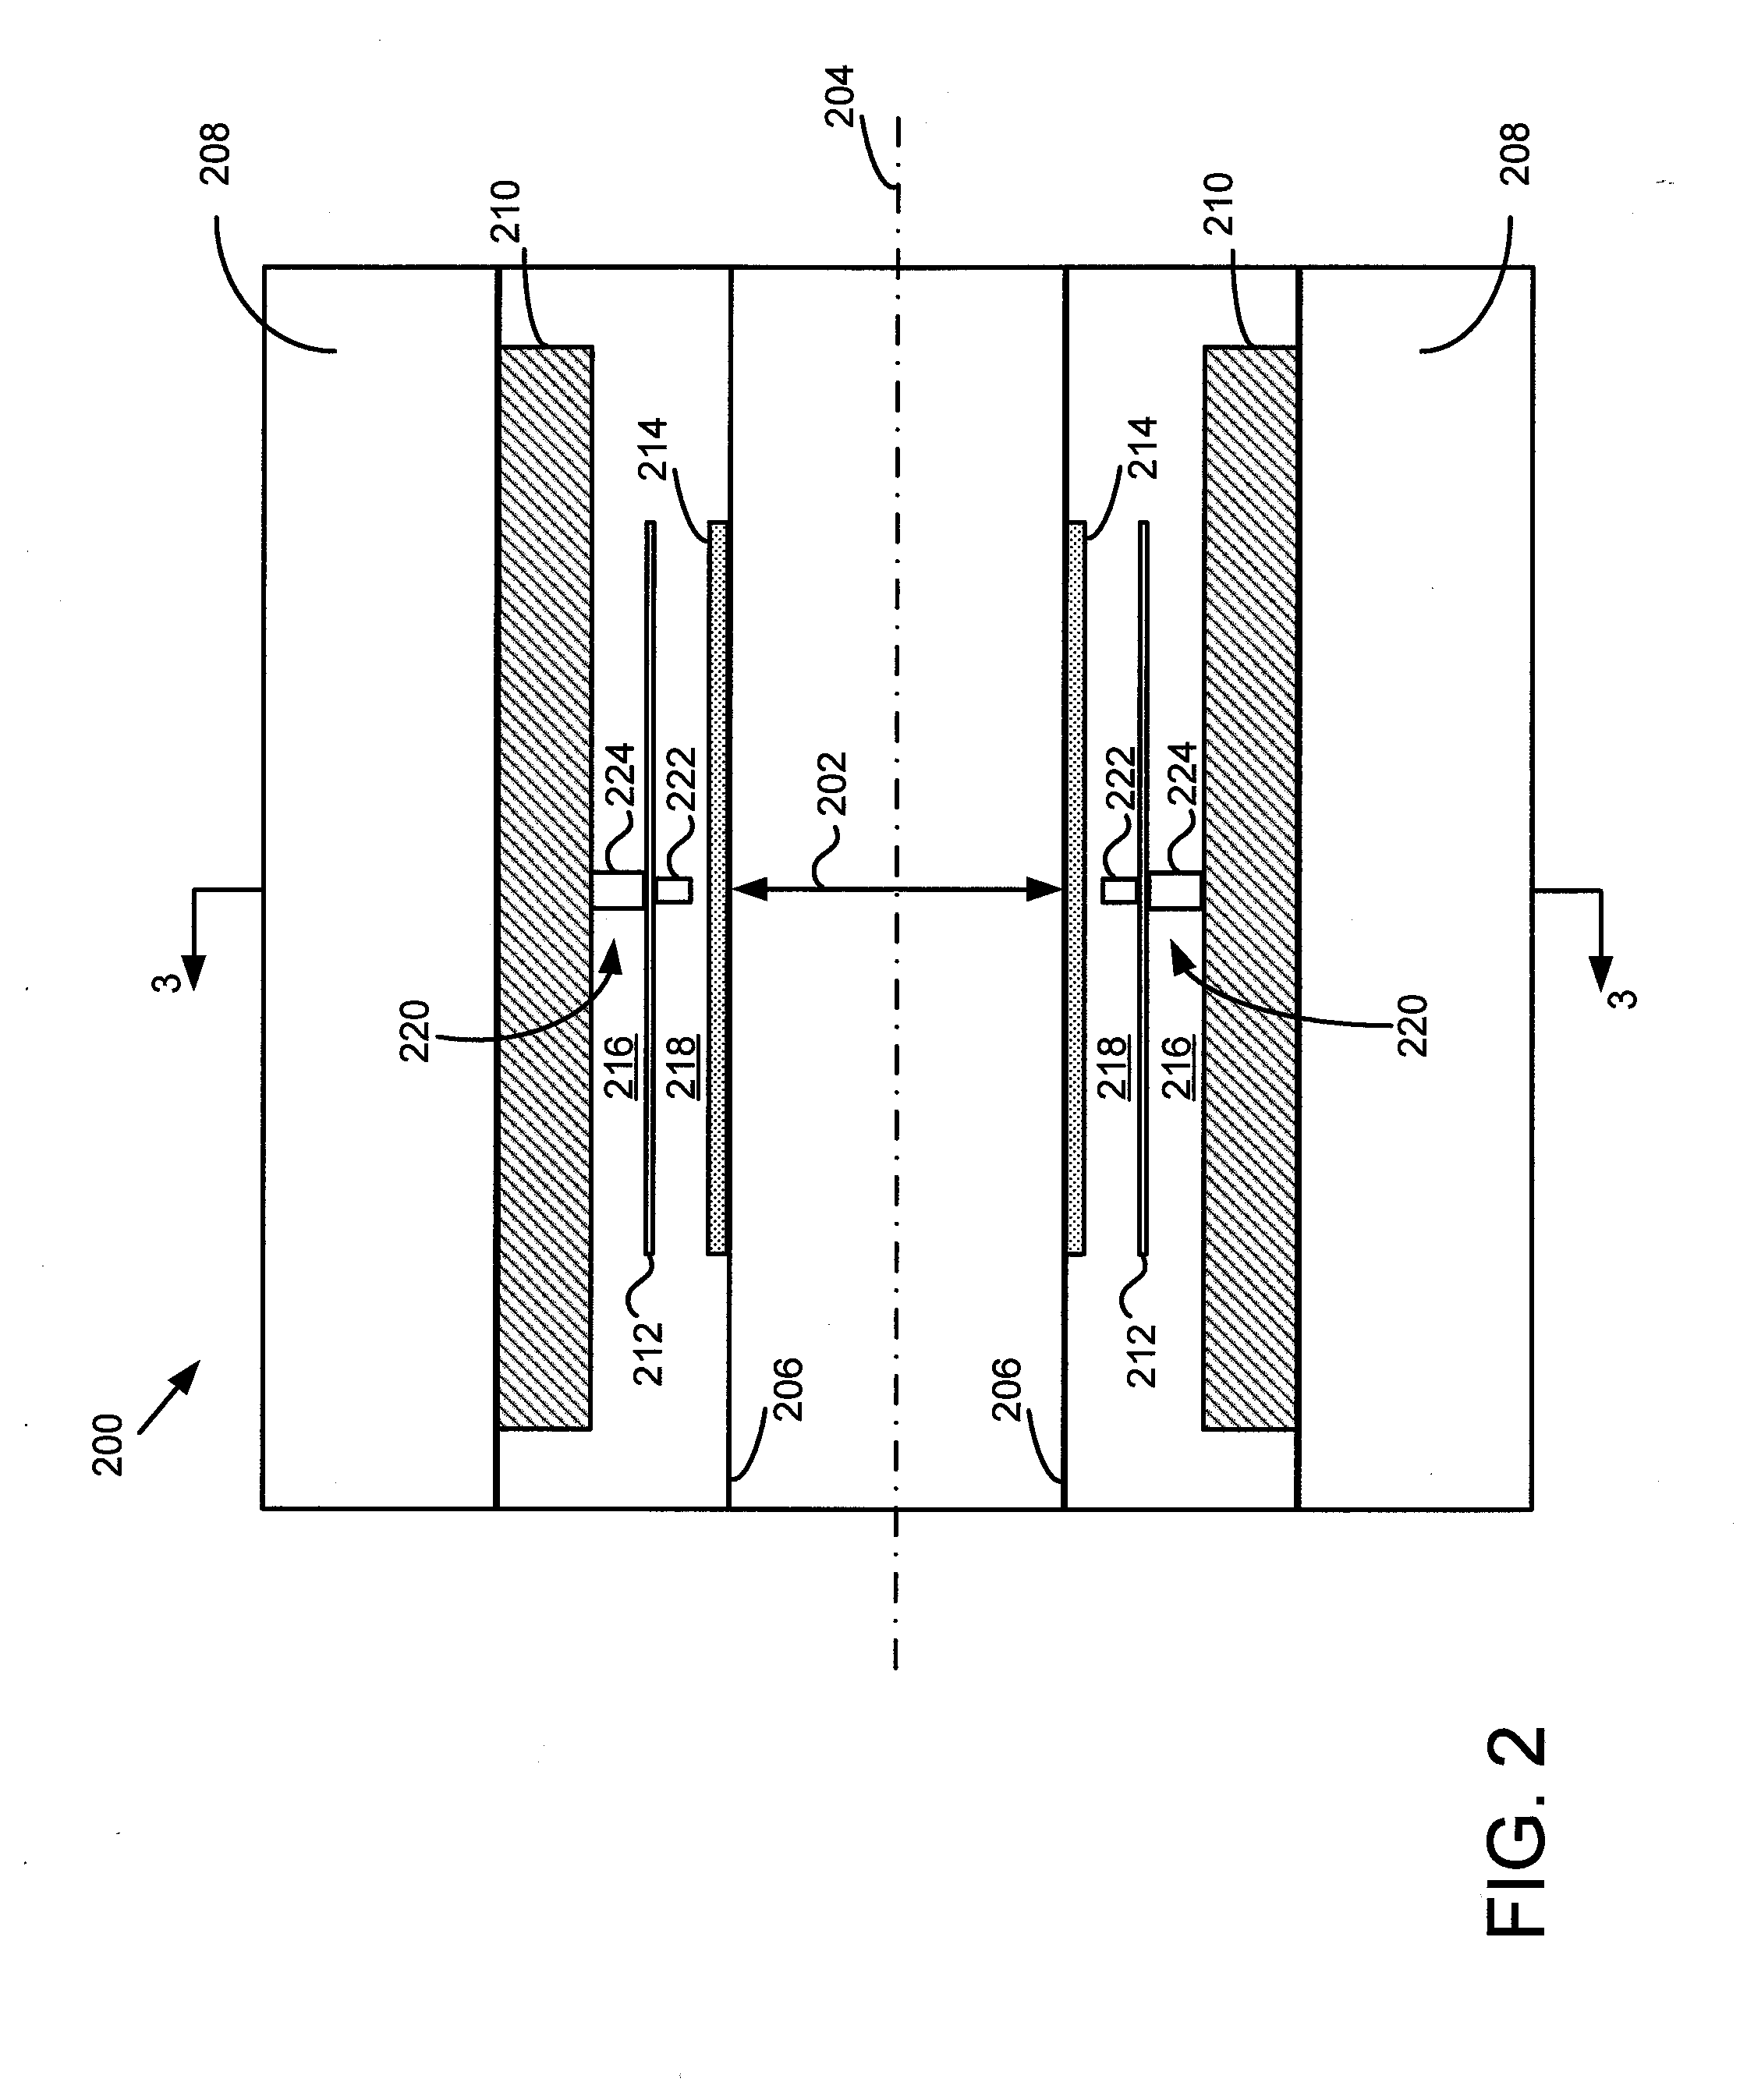 System and apparatus for detecting gamma rays in a pet/mri scanner